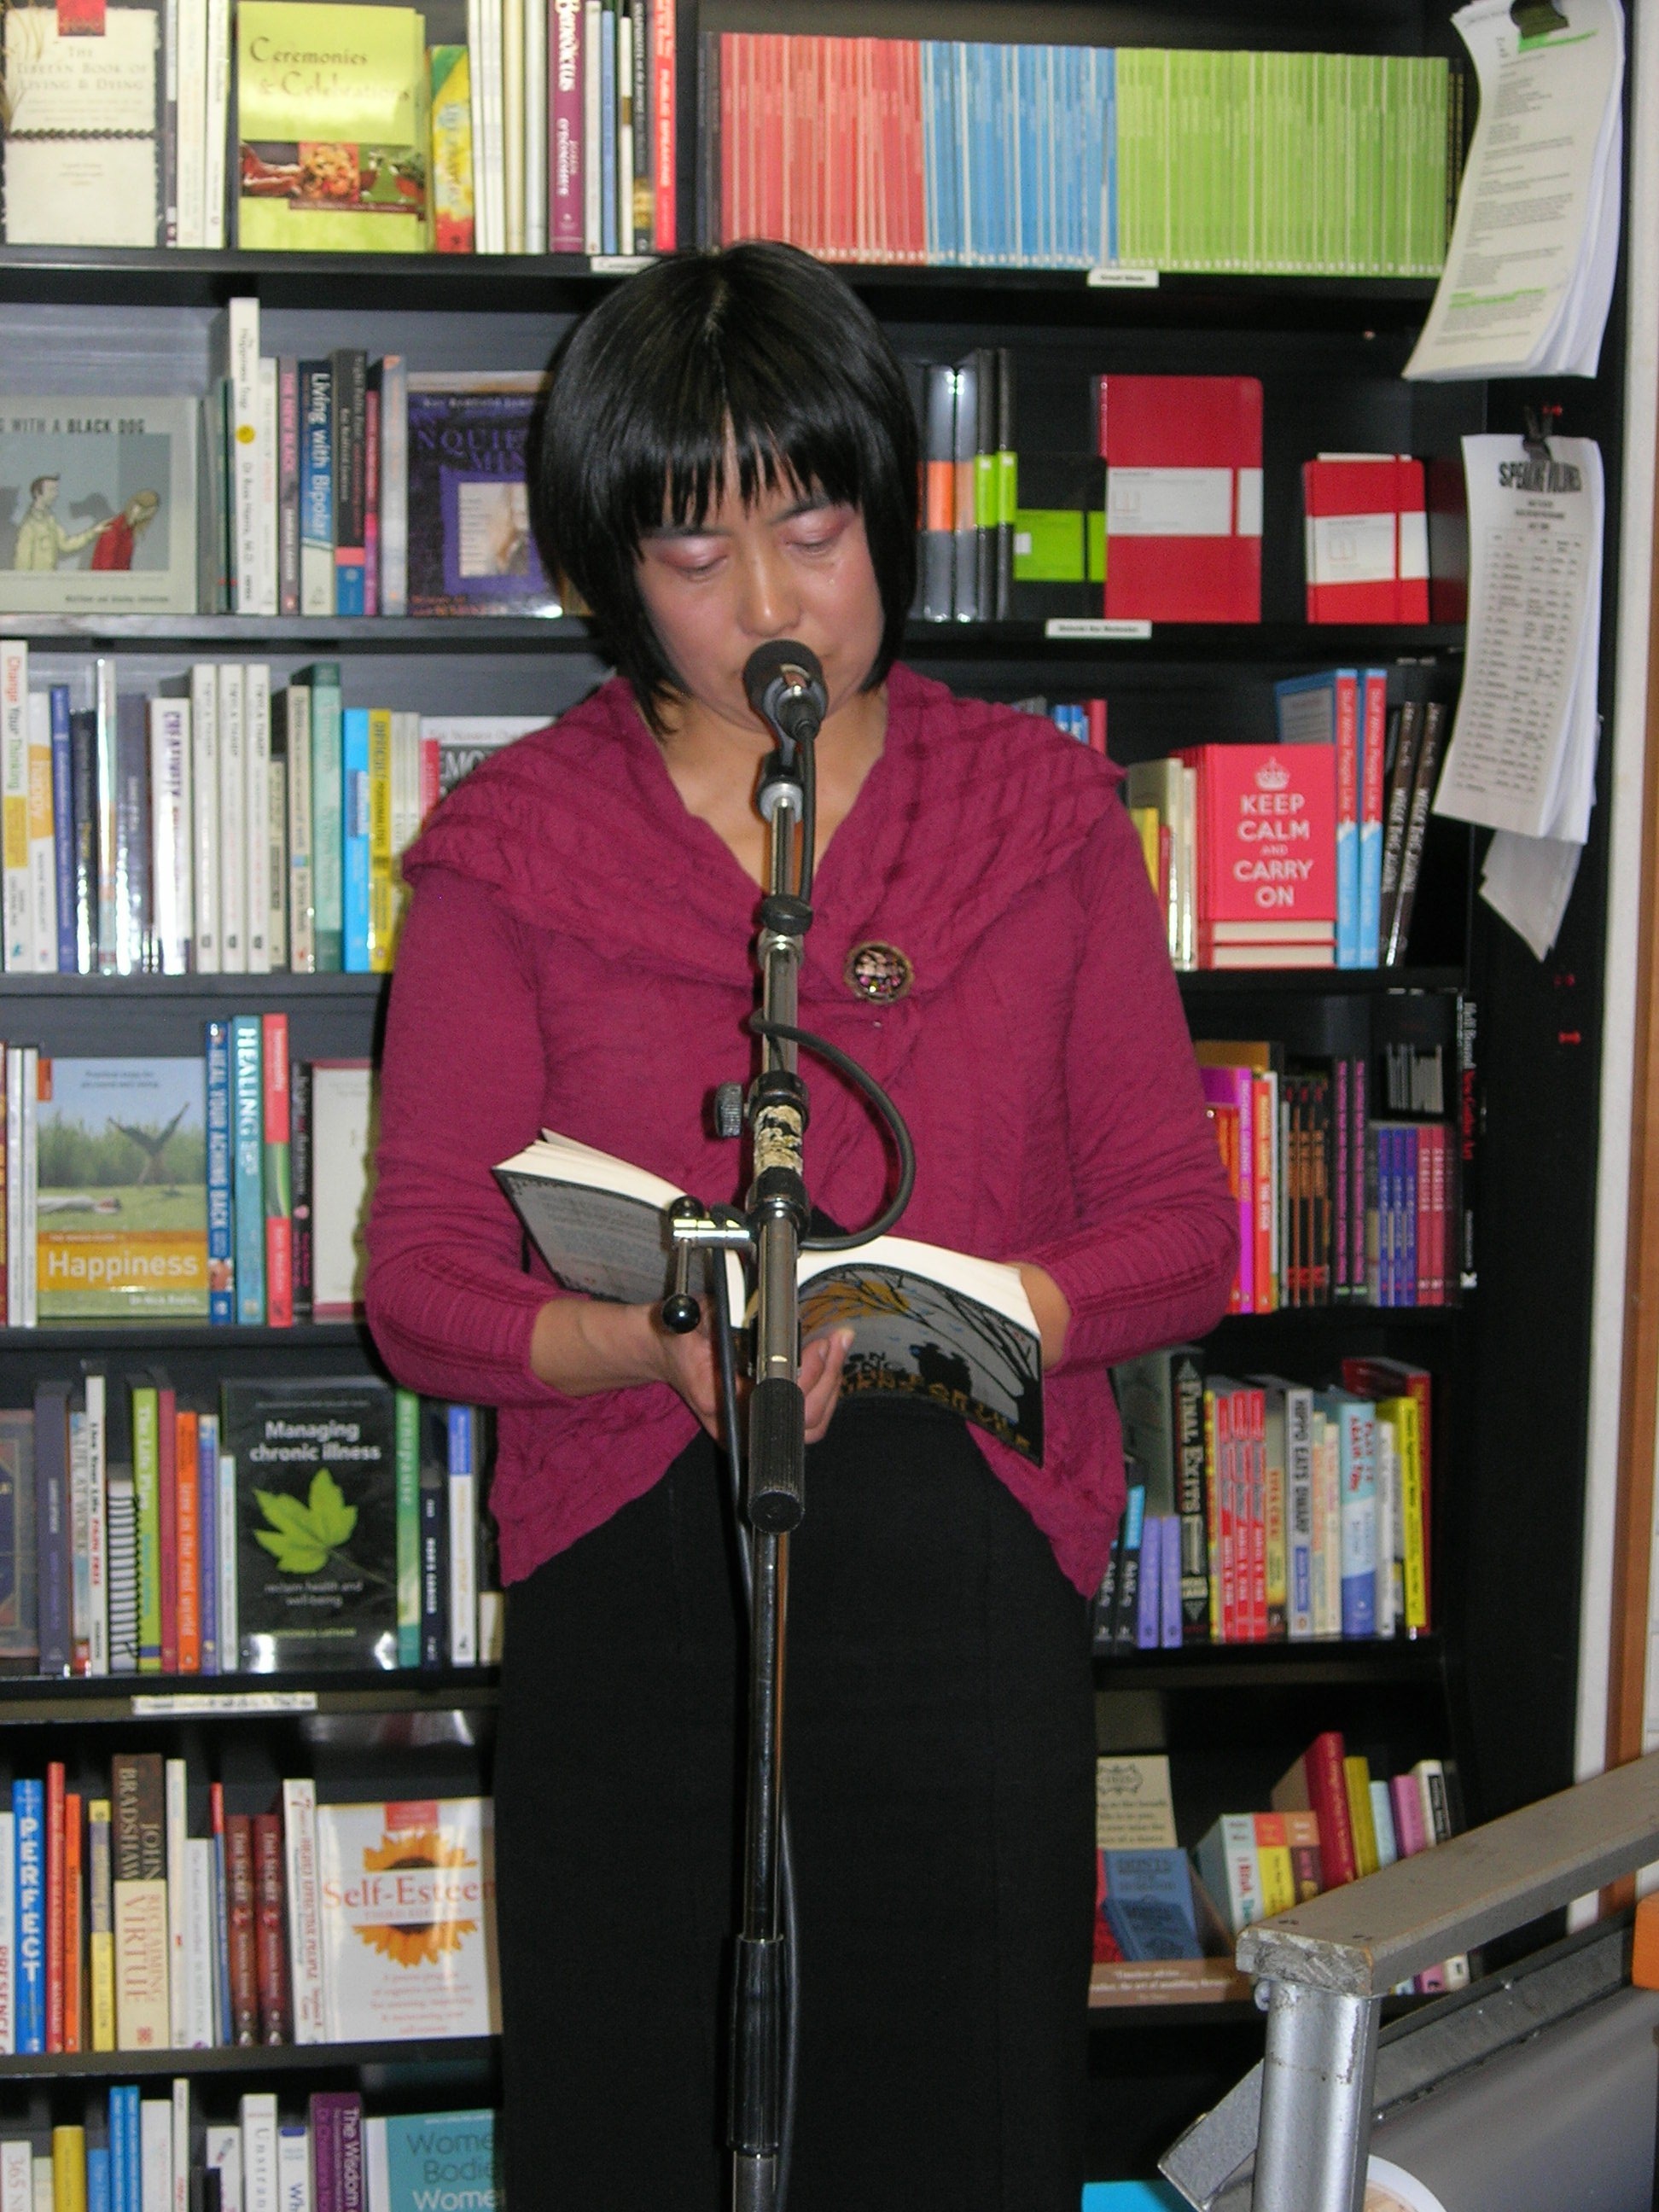 A woman wearing a burgundy knit reading from her book in front of a microphone in a bookshop